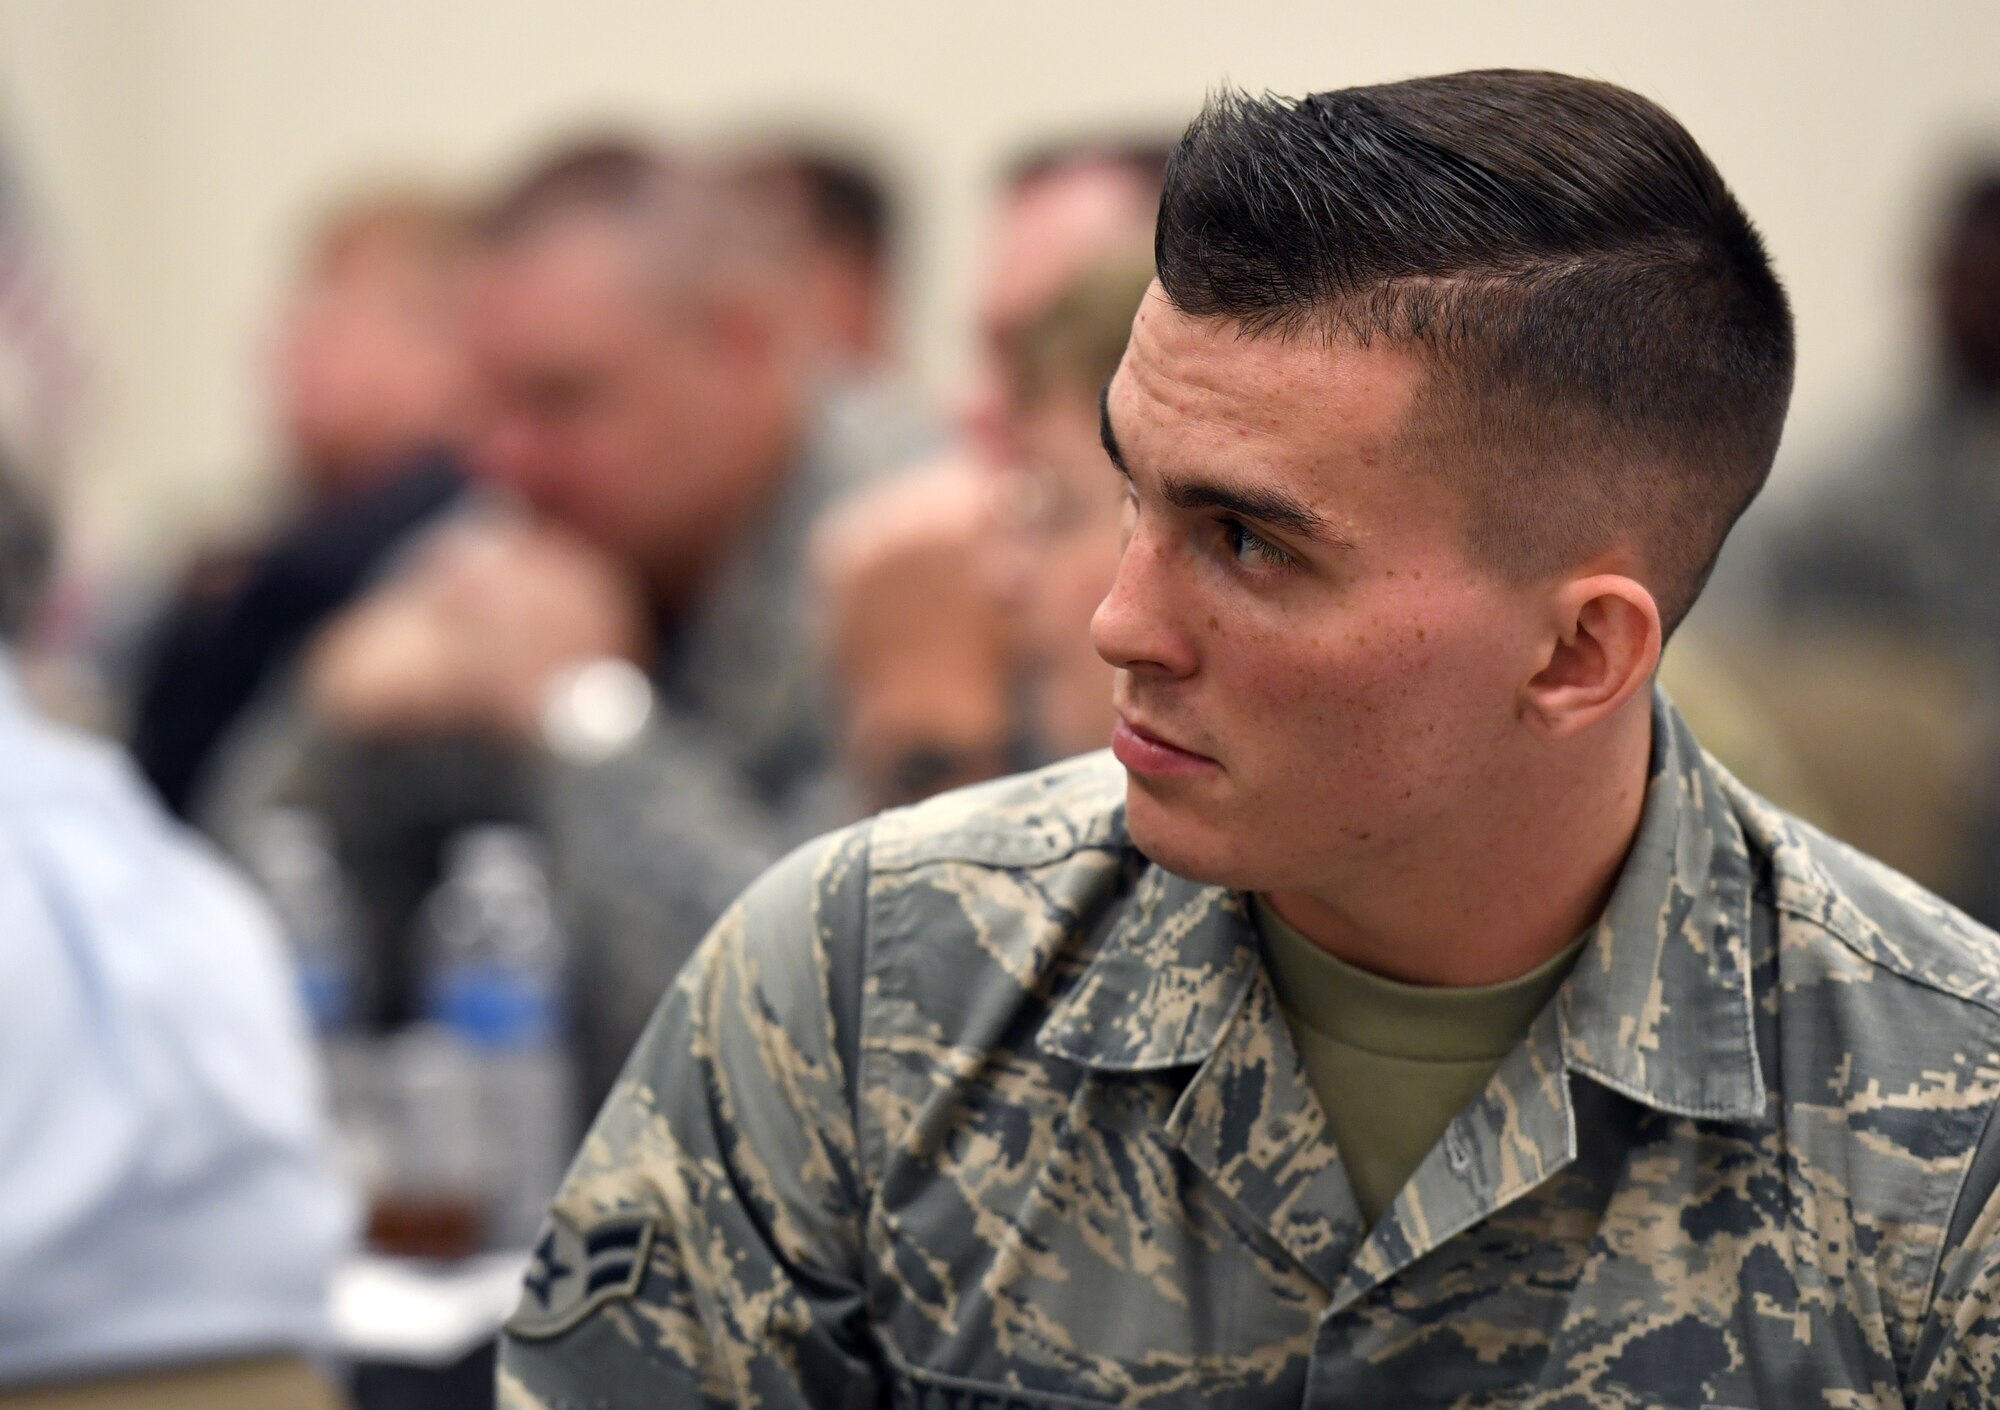 U.S. Air Force Airman 1st Class Matthew Ketterling, 81st Aerospace Medicine Squadron bioenvironmental engineering technician, attends the POW/MIA remembrance luncheon inside the Roberts Consolidated Aircraft Maintenance Facility at Keesler Air Force Base, Mississippi, Sept. 20, 2019. The event, hosted by the Air Force Sergeants Association, was held to raise awareness and to pay tribute to all prisoners of war and those military members still missing in action. (U.S. Air Force photo by Kemberly Groue)